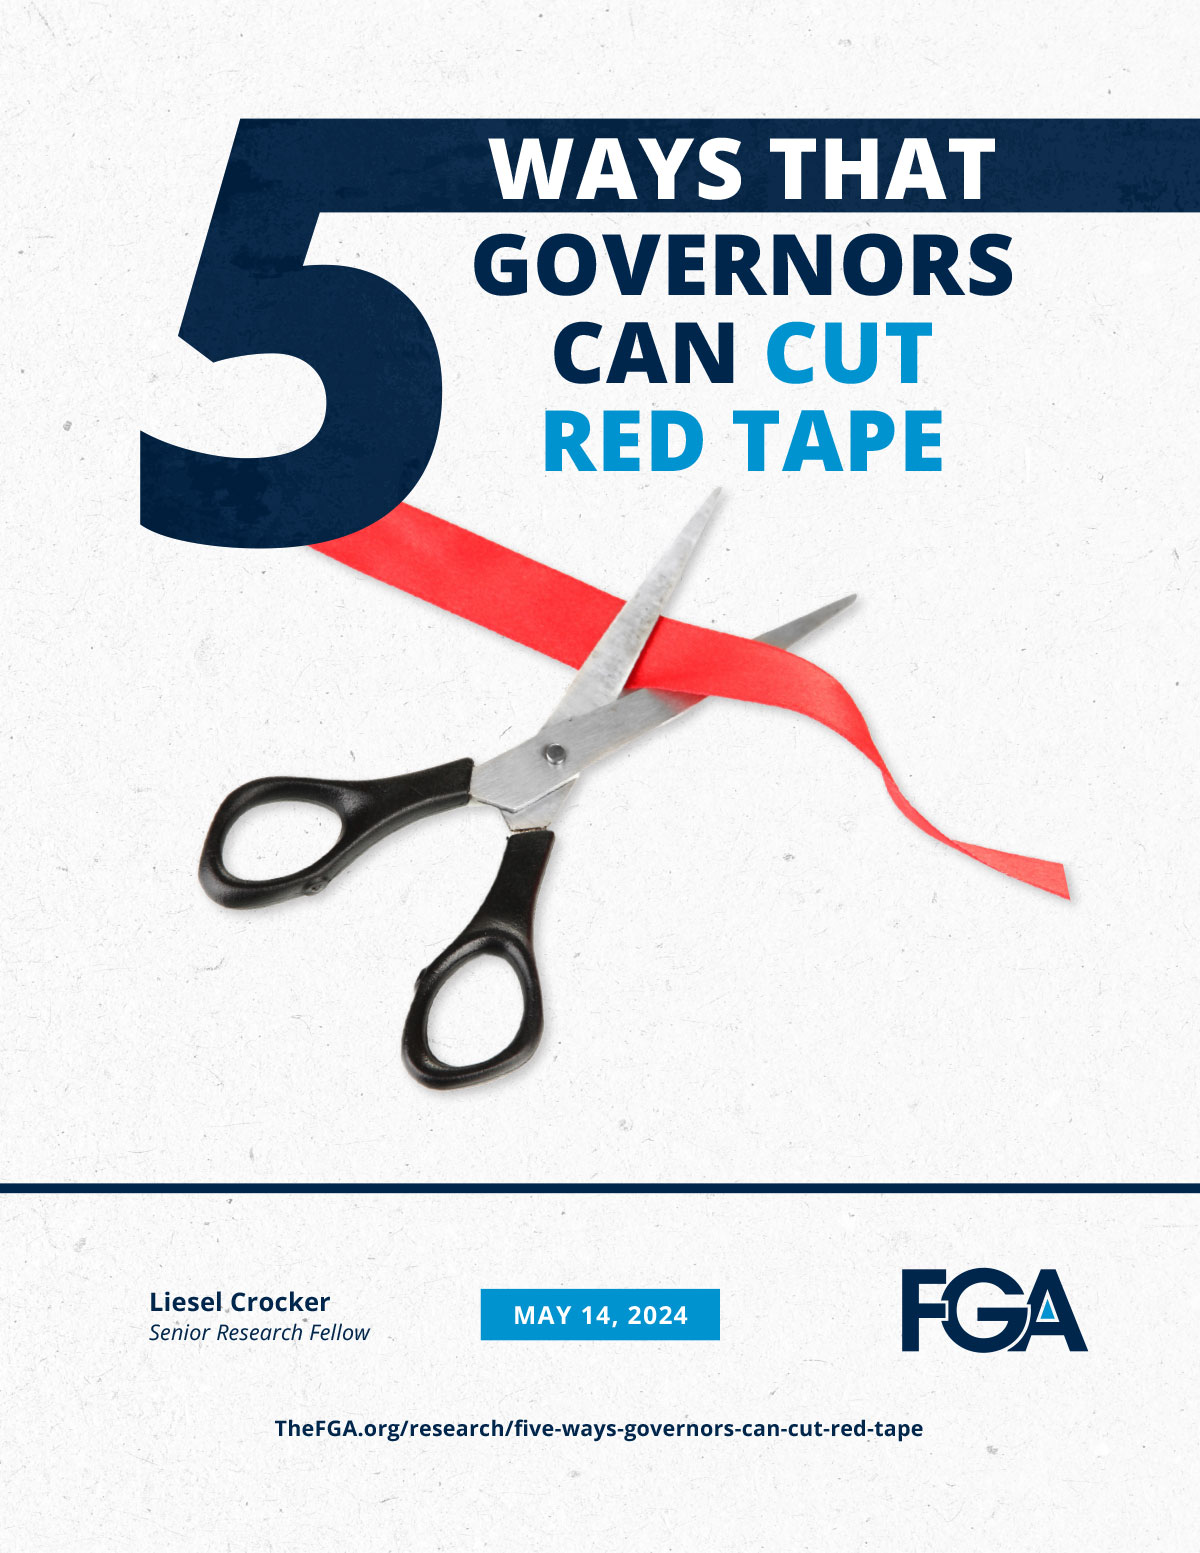 Five Ways That Governors Can Cut Red Tape